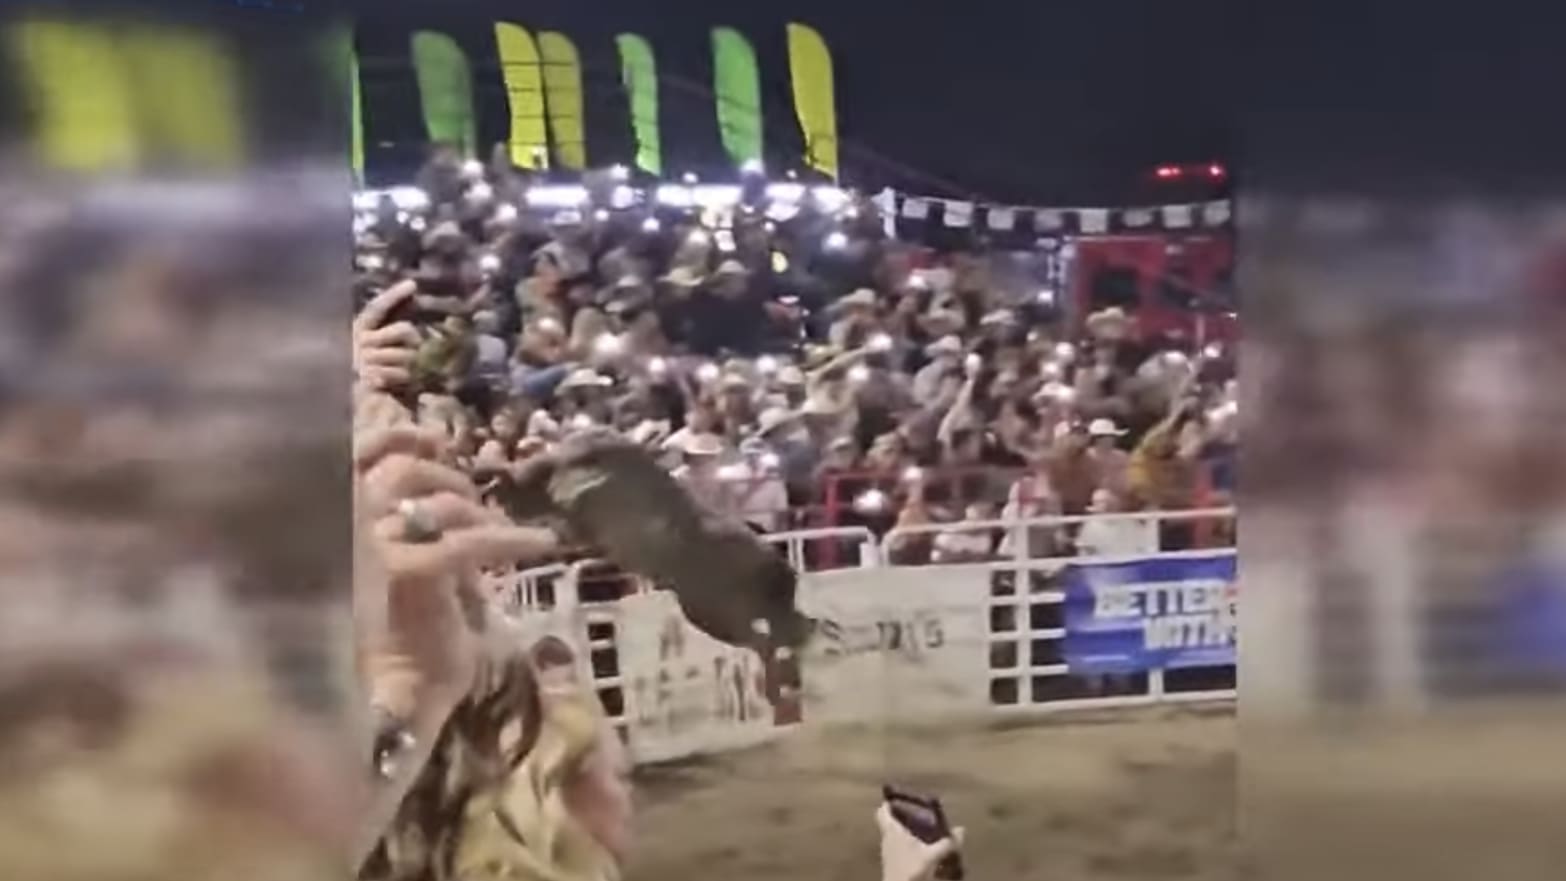 Three people were injured after a bull escaped from the Sisters Rodeo in Oregon.